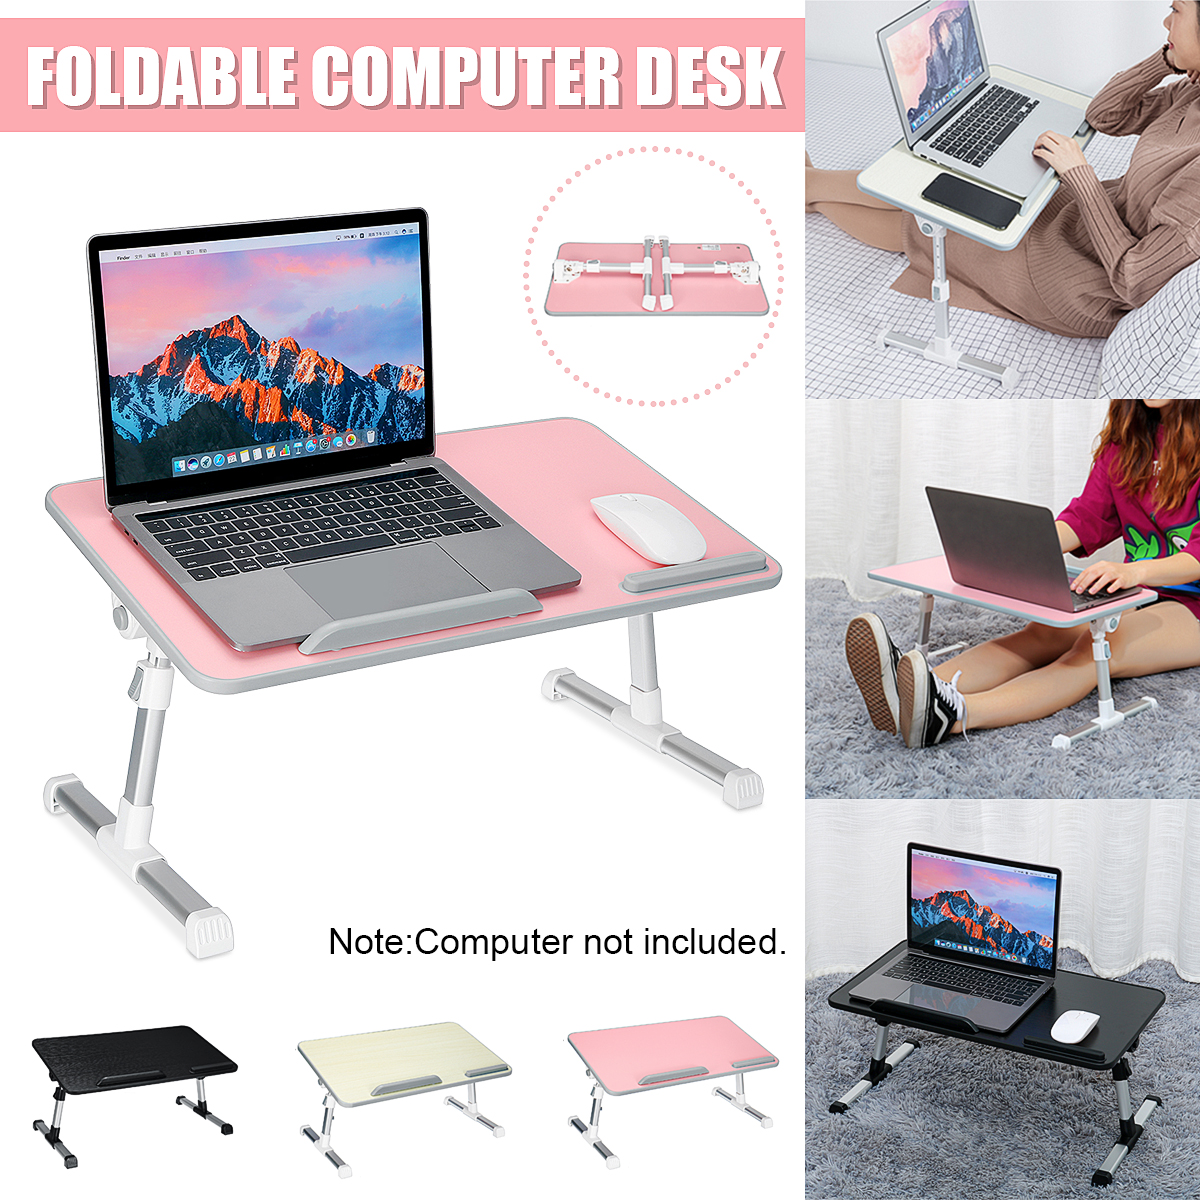 Foldable-Laptop-Desk-Adjustable-Height-Computer-Notebook-Desk-Breakfast-Serving-Table-Bed-Tray-Home--1750162-1